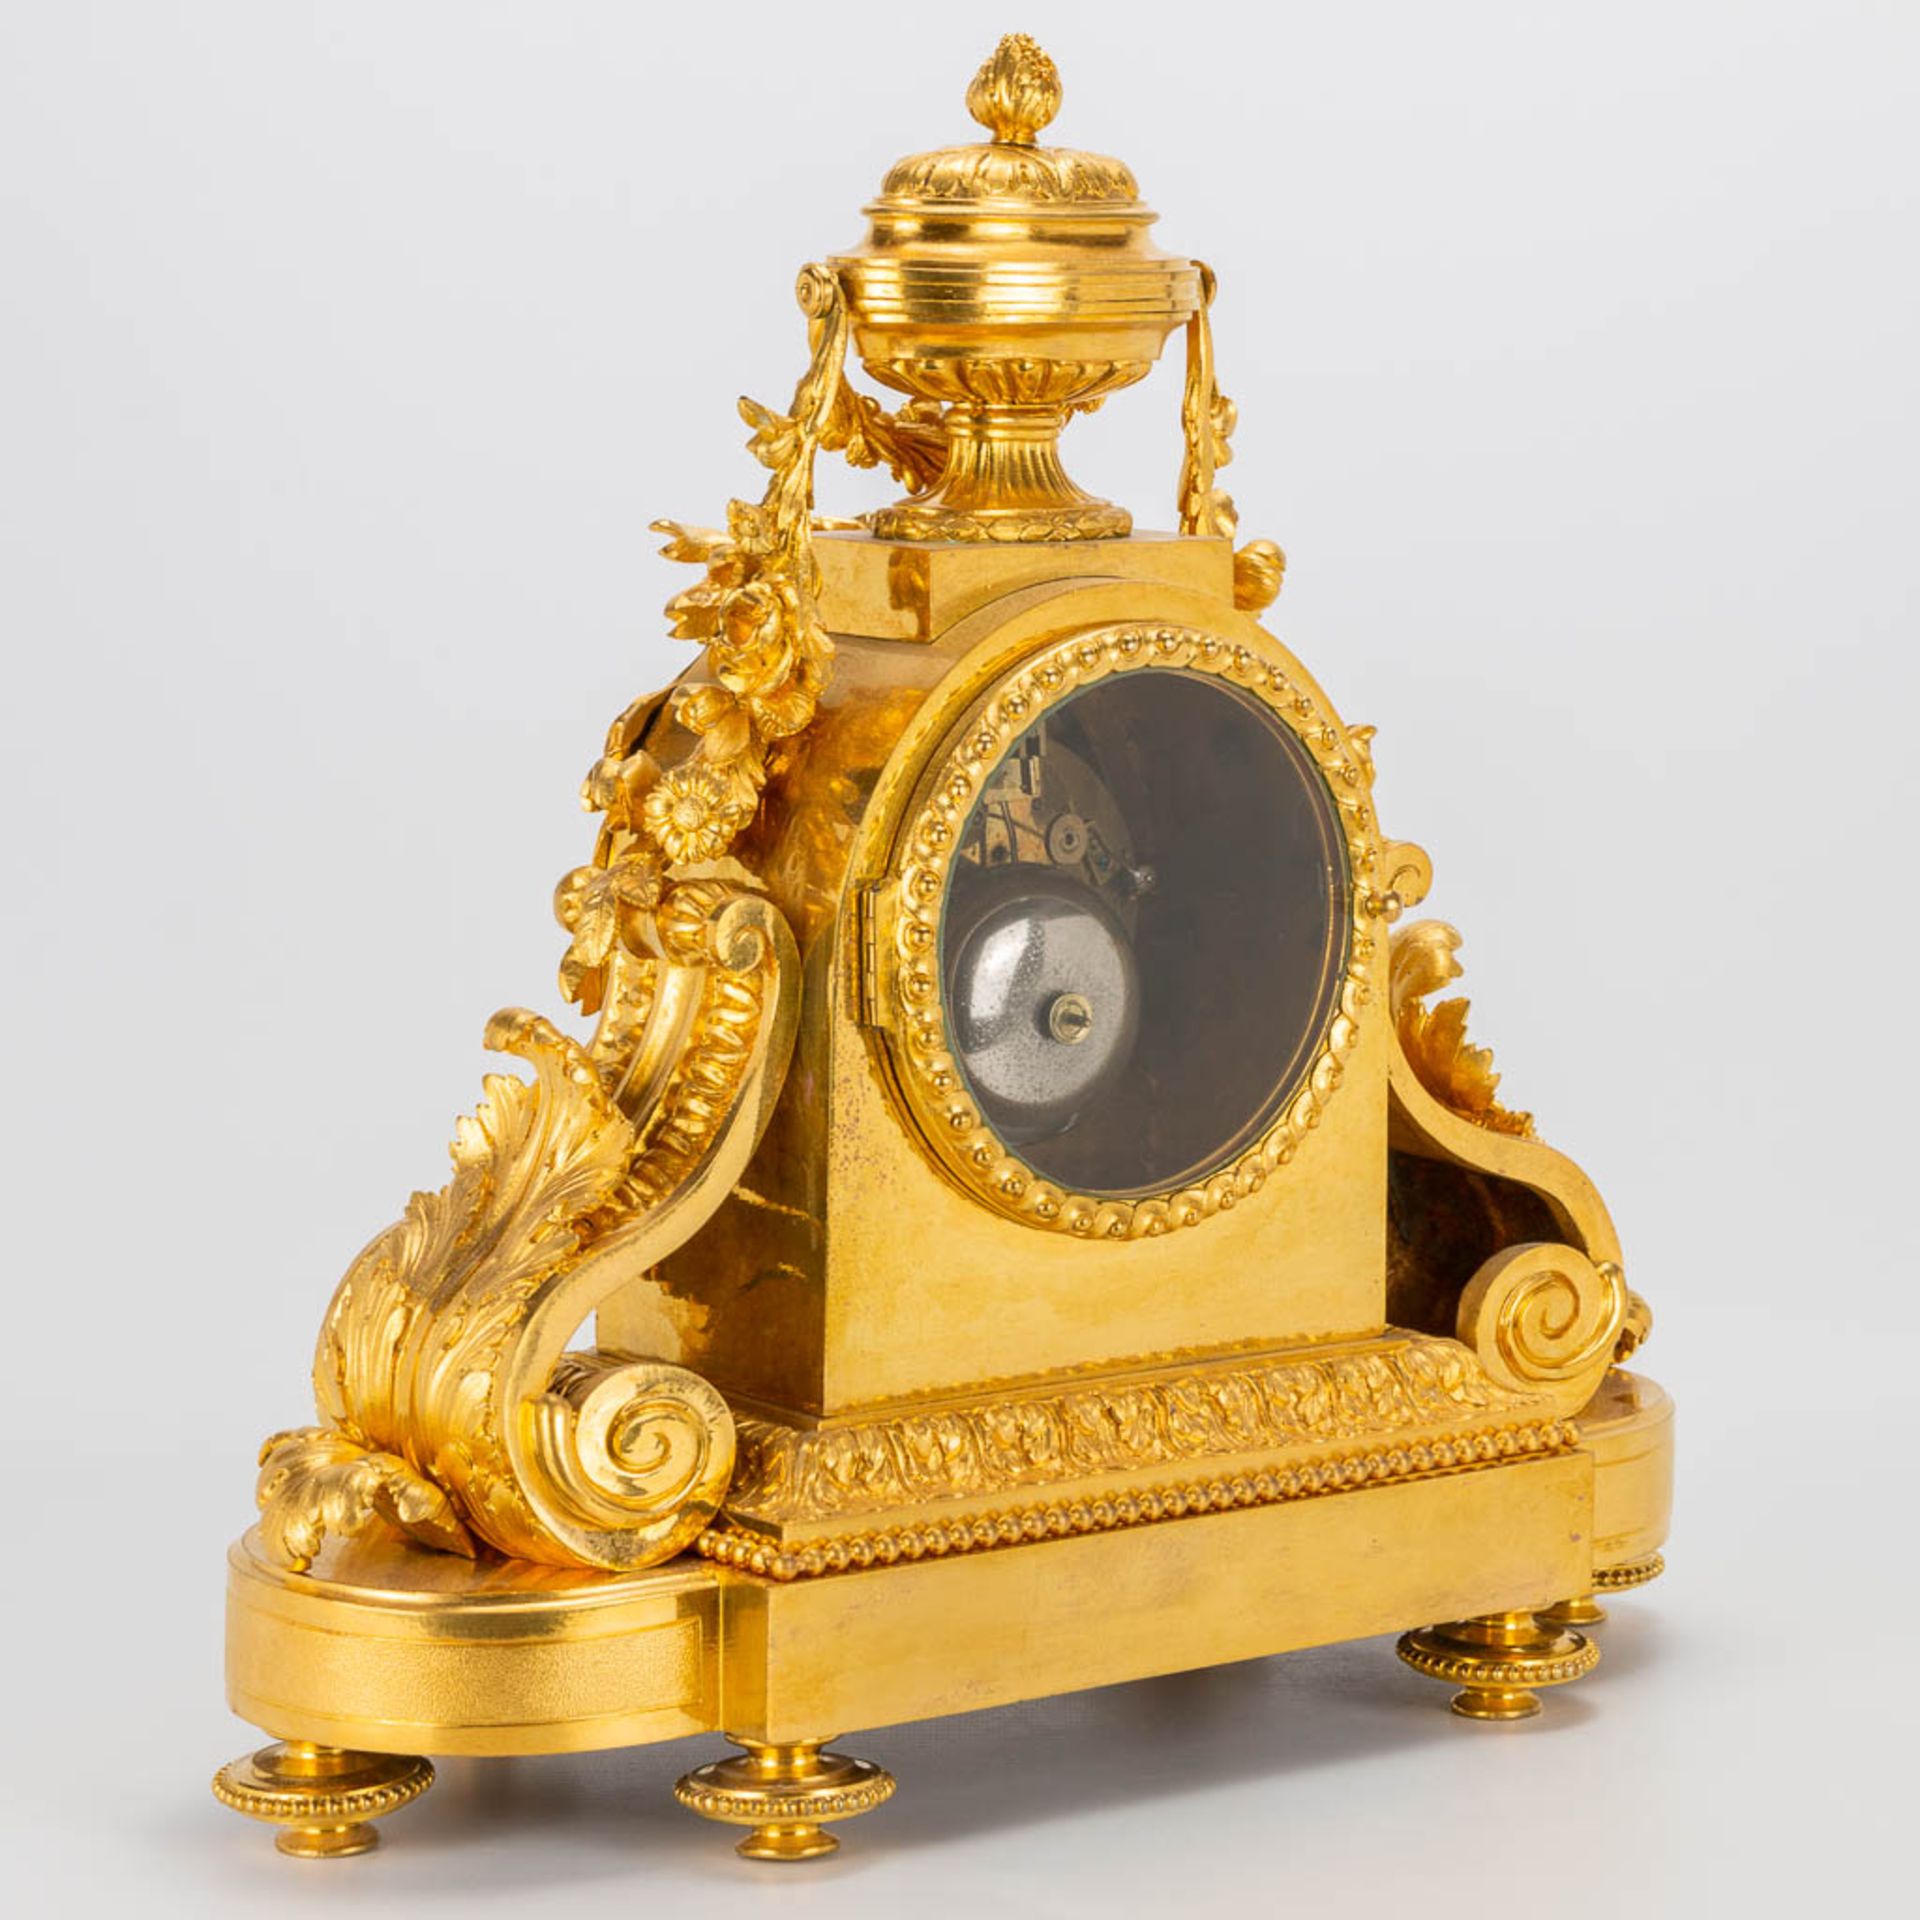 A bronze ormolu table clock made in Louis XVI style. 19th century. (15 x 41 x 42 cm) - Image 8 of 20